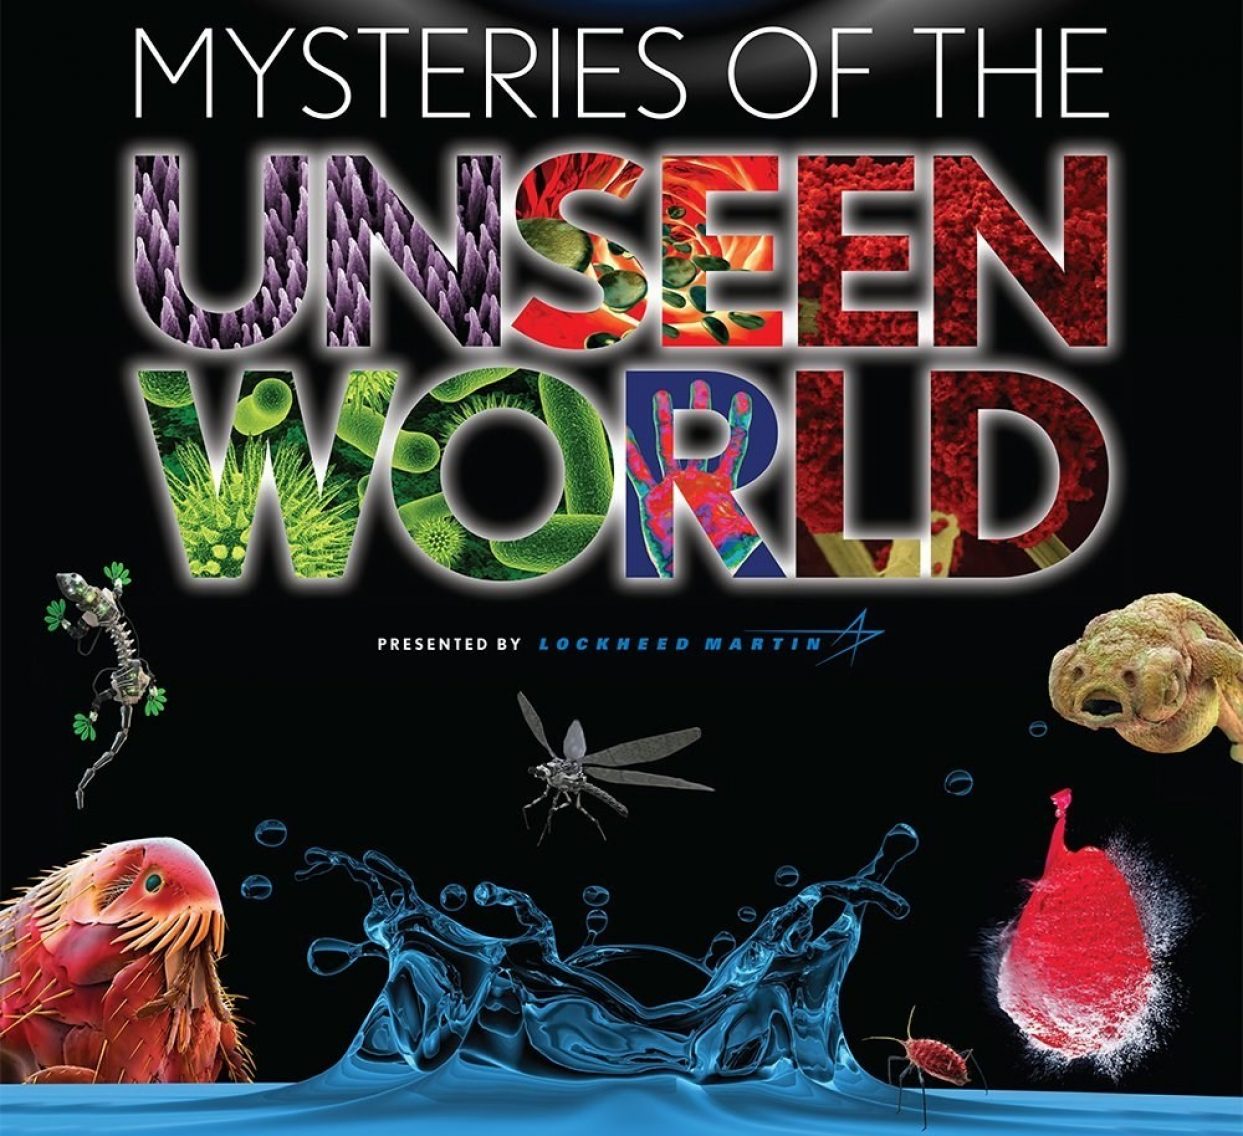 Mysteries of the Unseen World (2013)